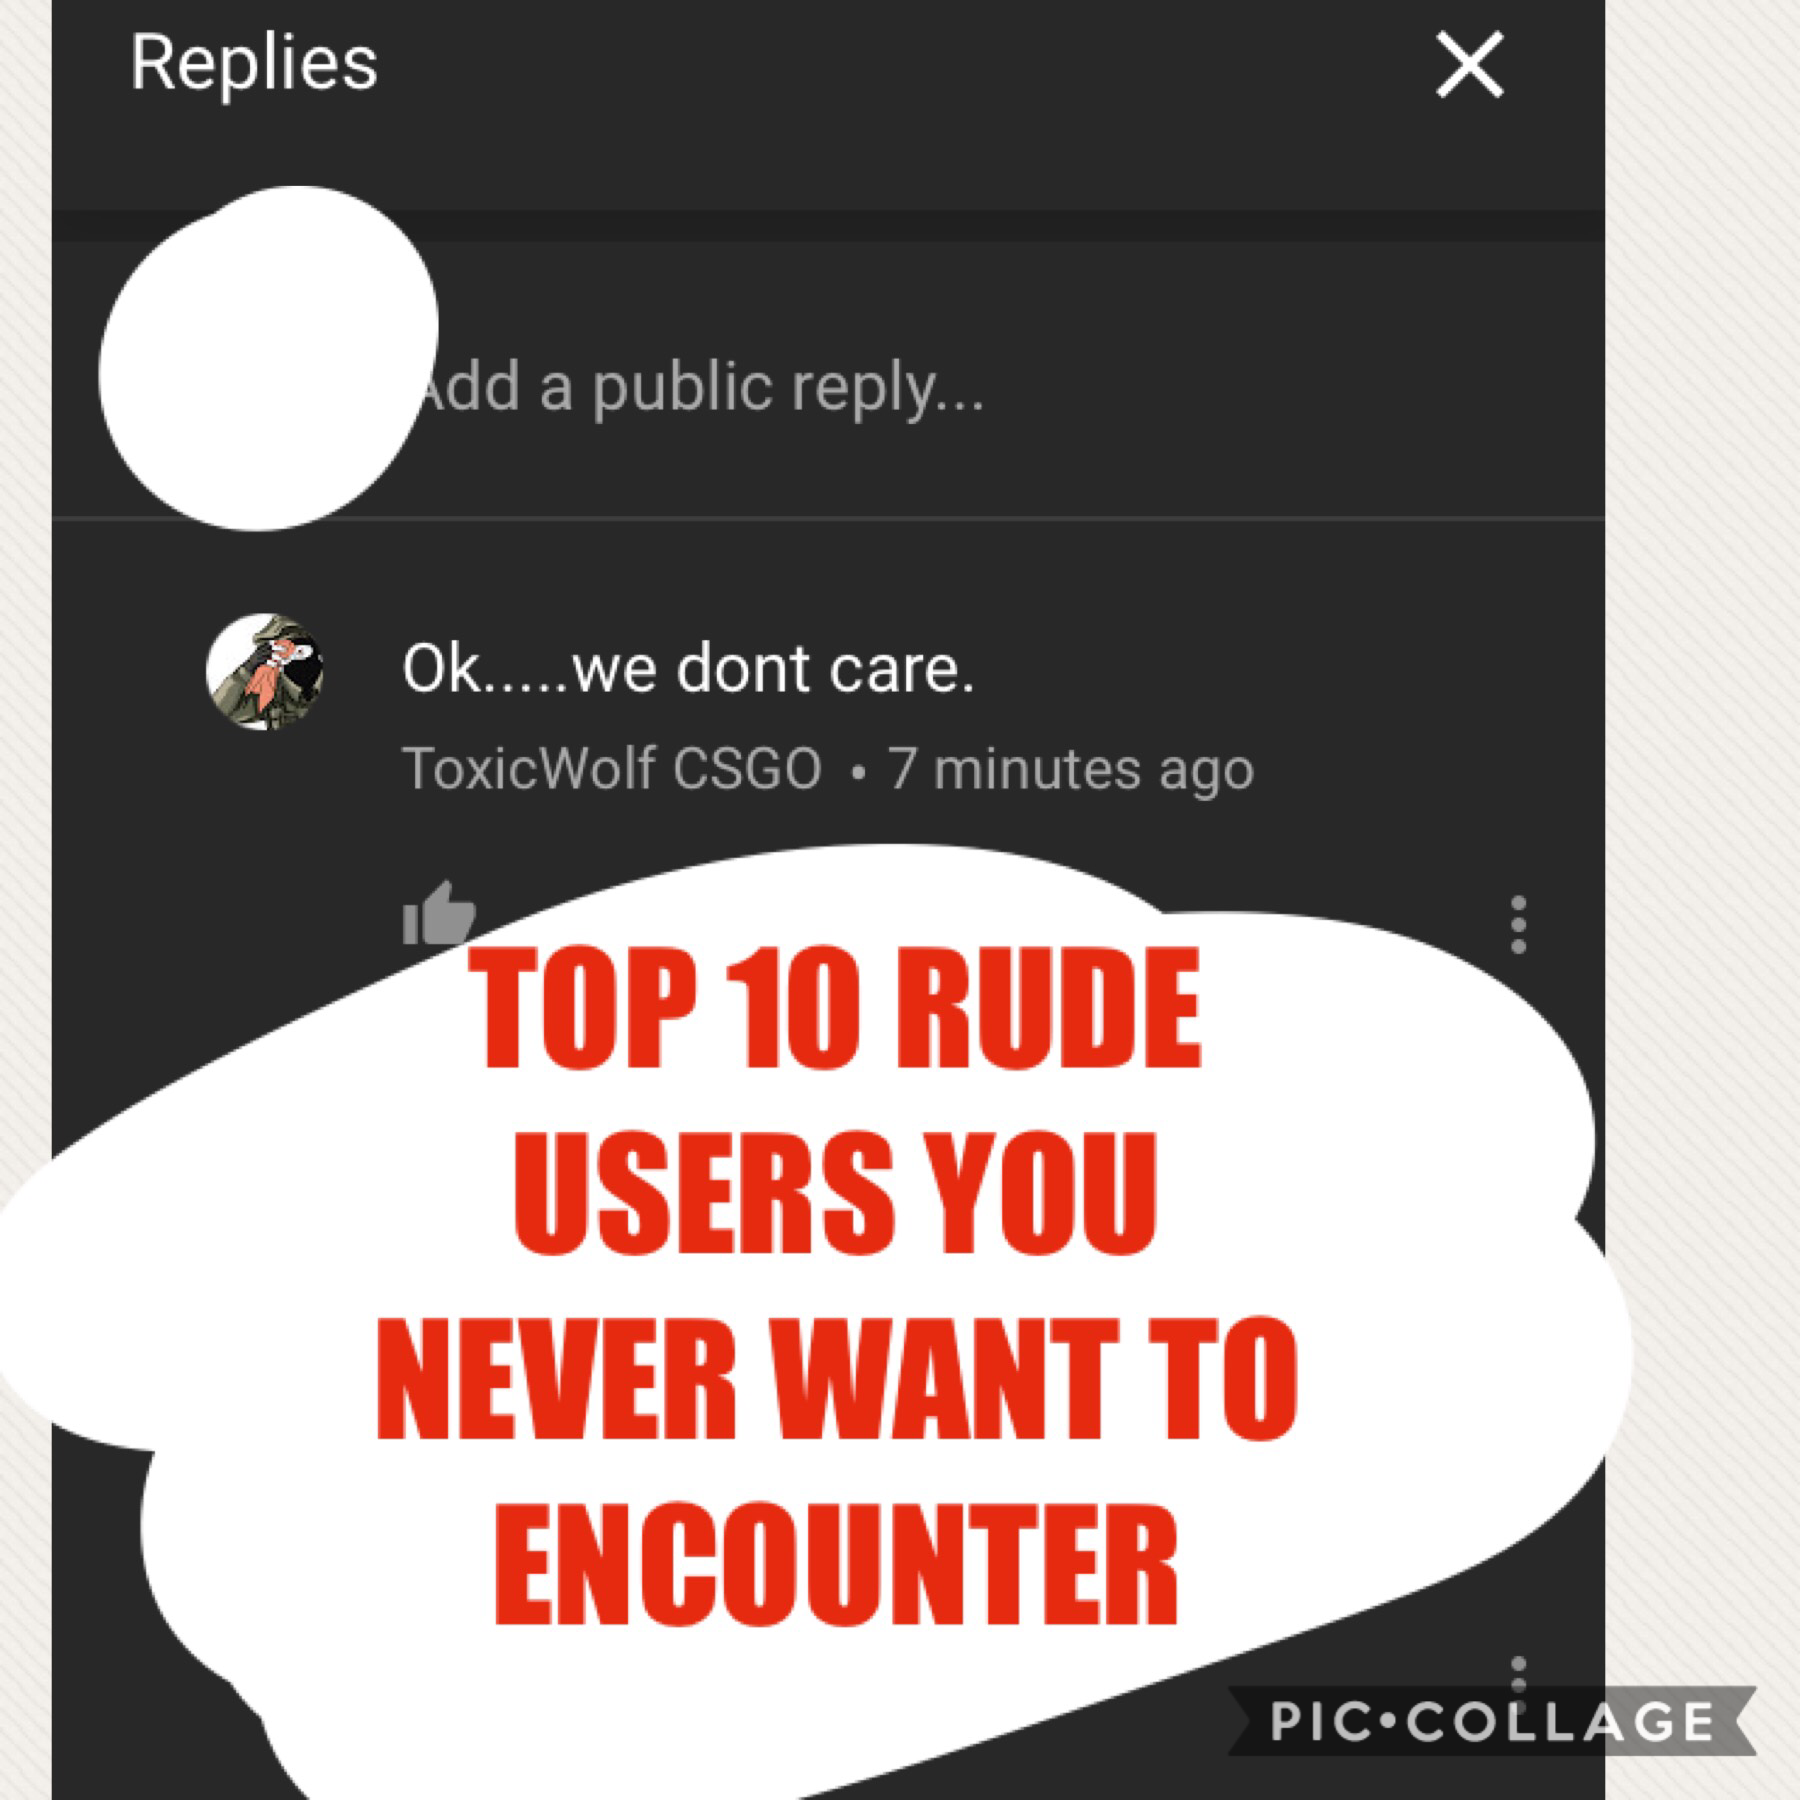 Tap for so much magic 😳
Who ever encountered a 
rude use or was be a rude user?